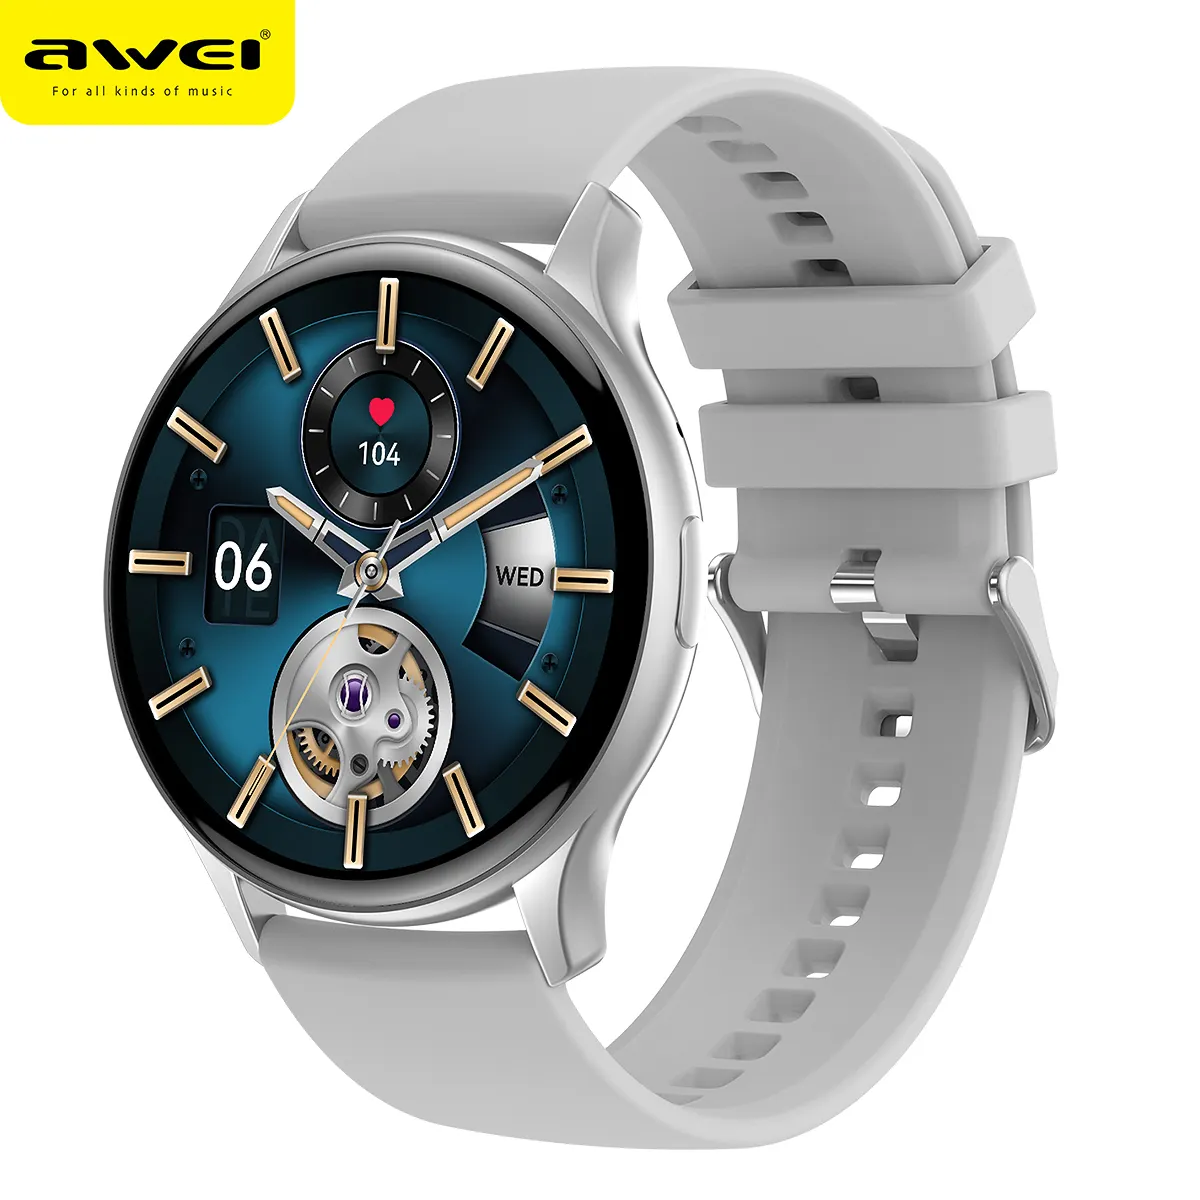 Ip68 Awei Fashion Smart Watches Amoled Magnetic Charging Ip68 Waterproof Bt5.0 Call Blood Oxygen/Pressure Fitness Tracker Smartwatch